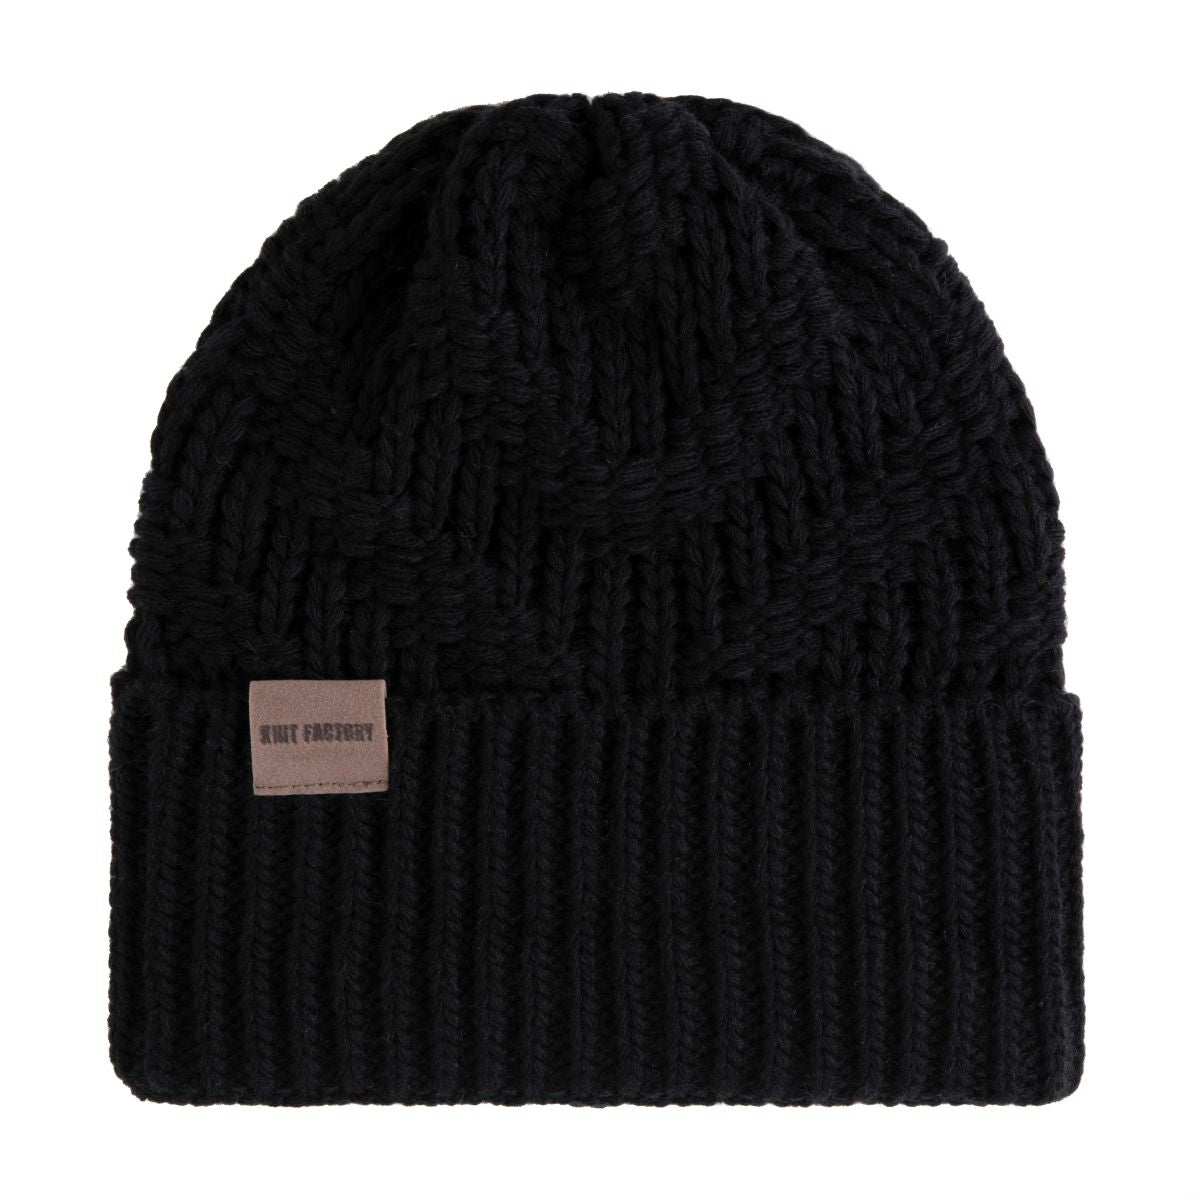 Knit Factory - Sally beanie | knitted hat